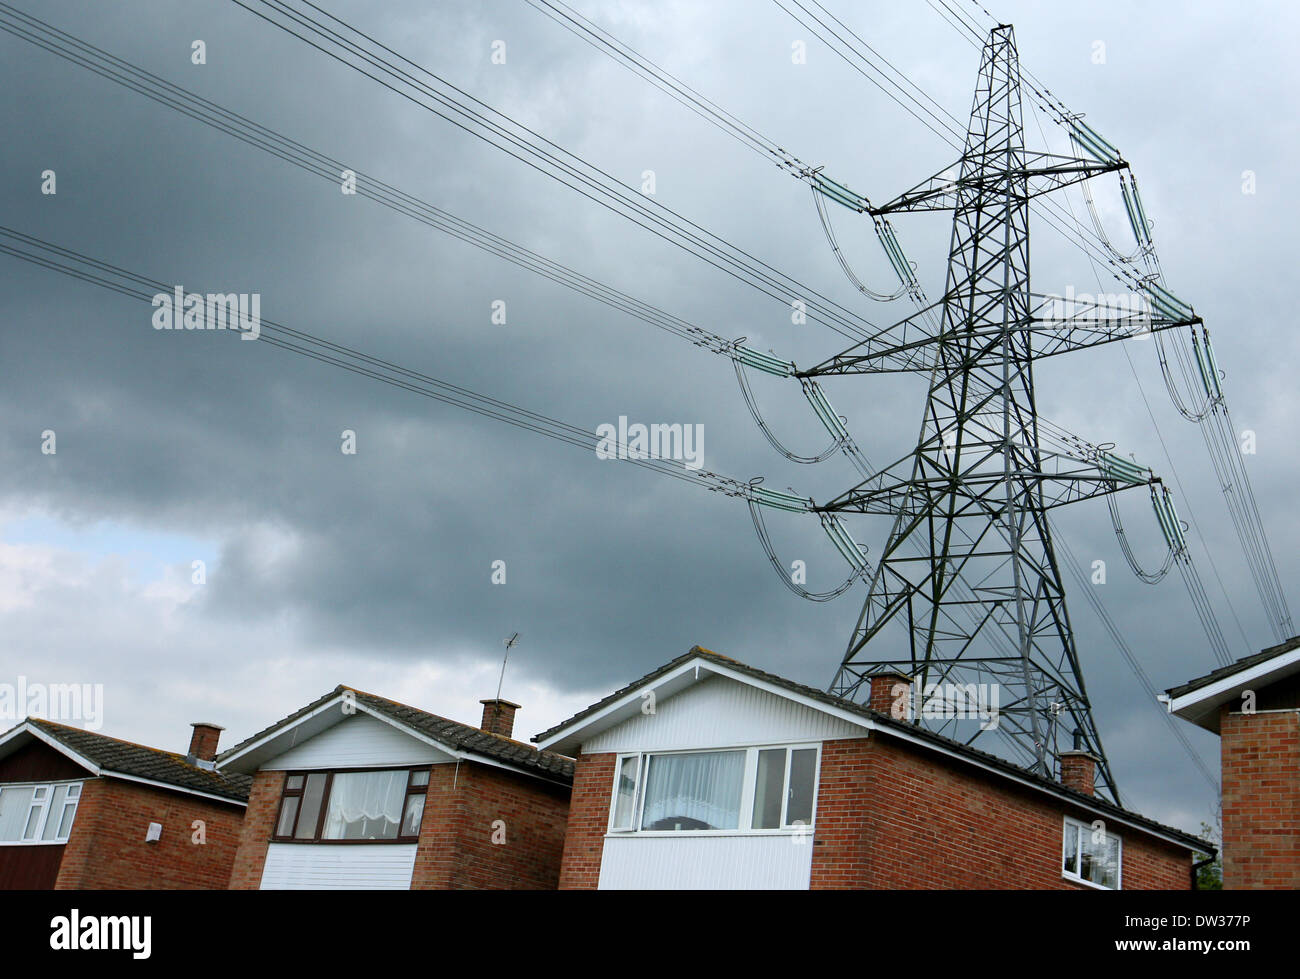 26/02/14 File photo    Ofgem has confirmed that new regulations due to be implemented at the end of next month will force the 'Big Six' energy suppliers to publish their wholesale generation prices to independent suppliers up to two years in advance. Stock Photo